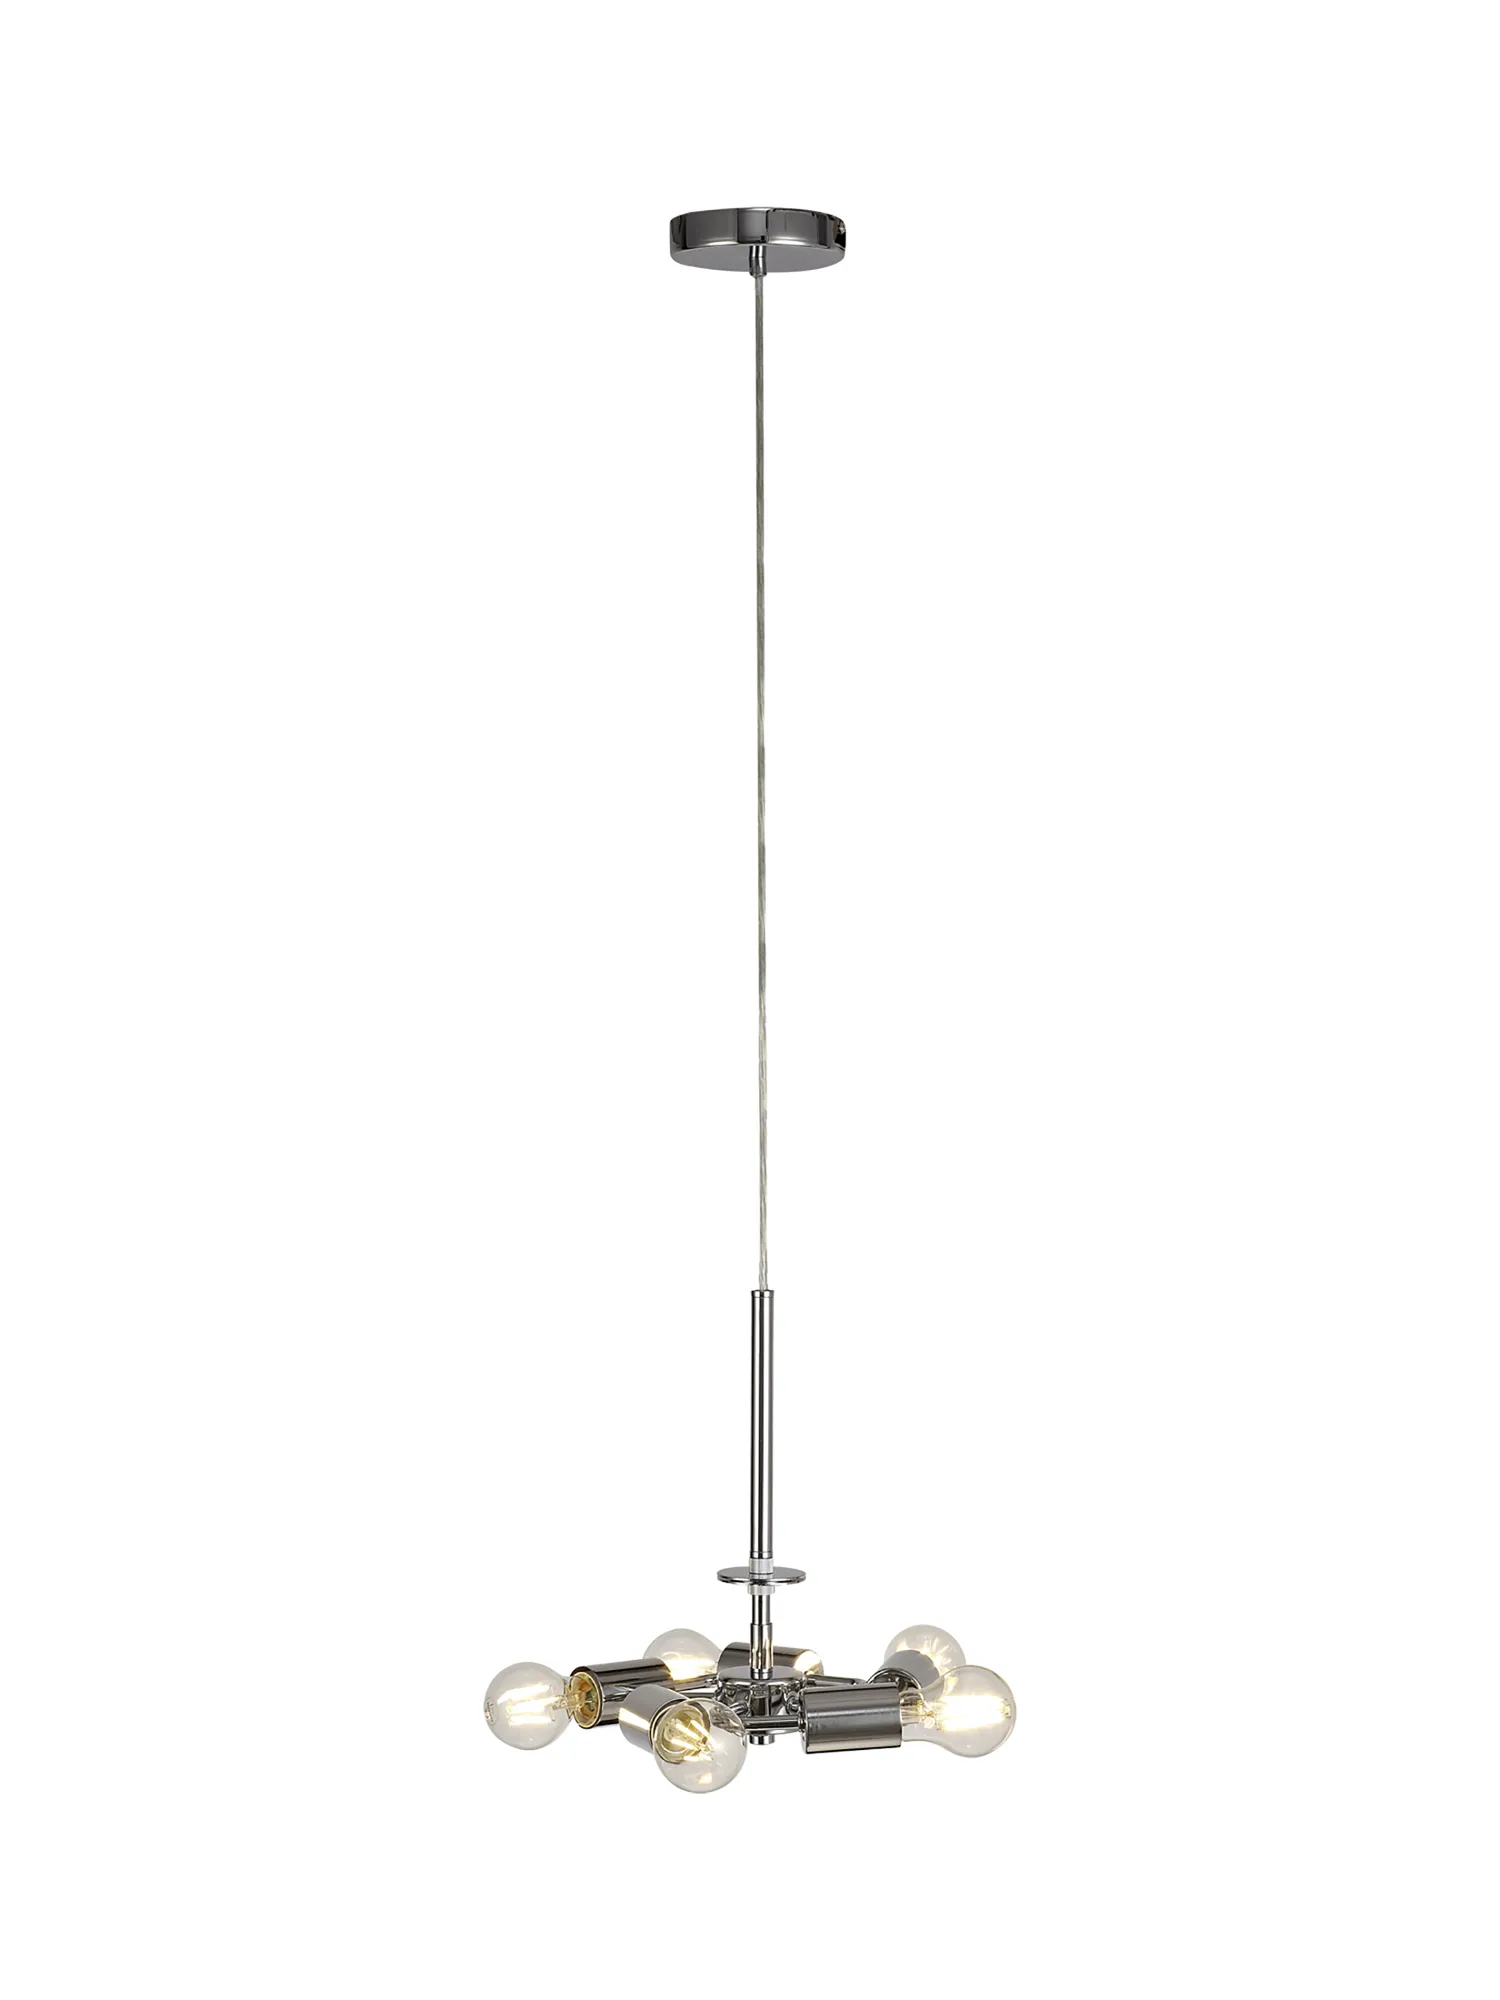 Baymont 60cm 5 Light Pendant Polished Chrome; Nude Beige/Moonlight; Frosted Diffuser DK0476  Deco Baymont CH NU